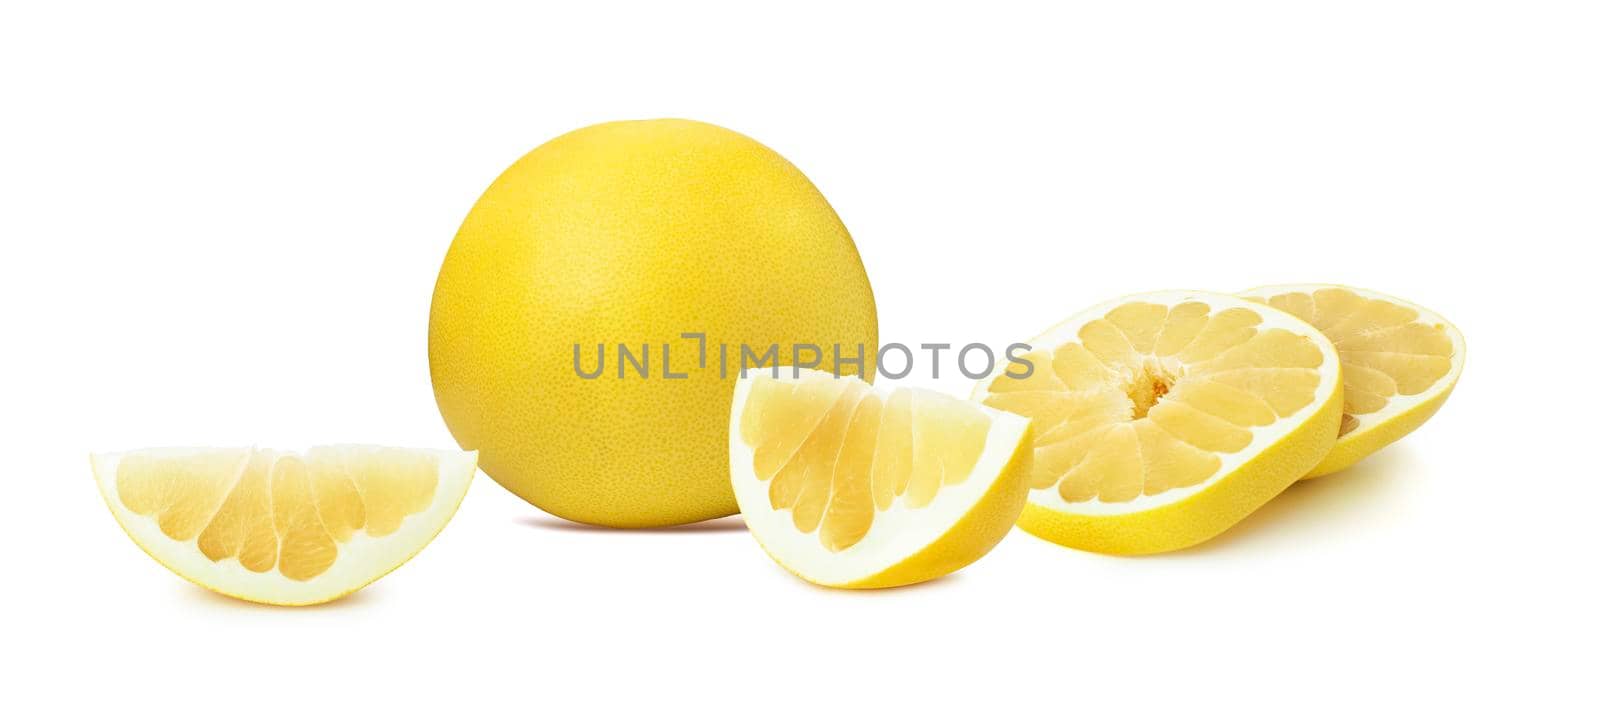 Pomelo citrus fruit and slices isolated on a white background